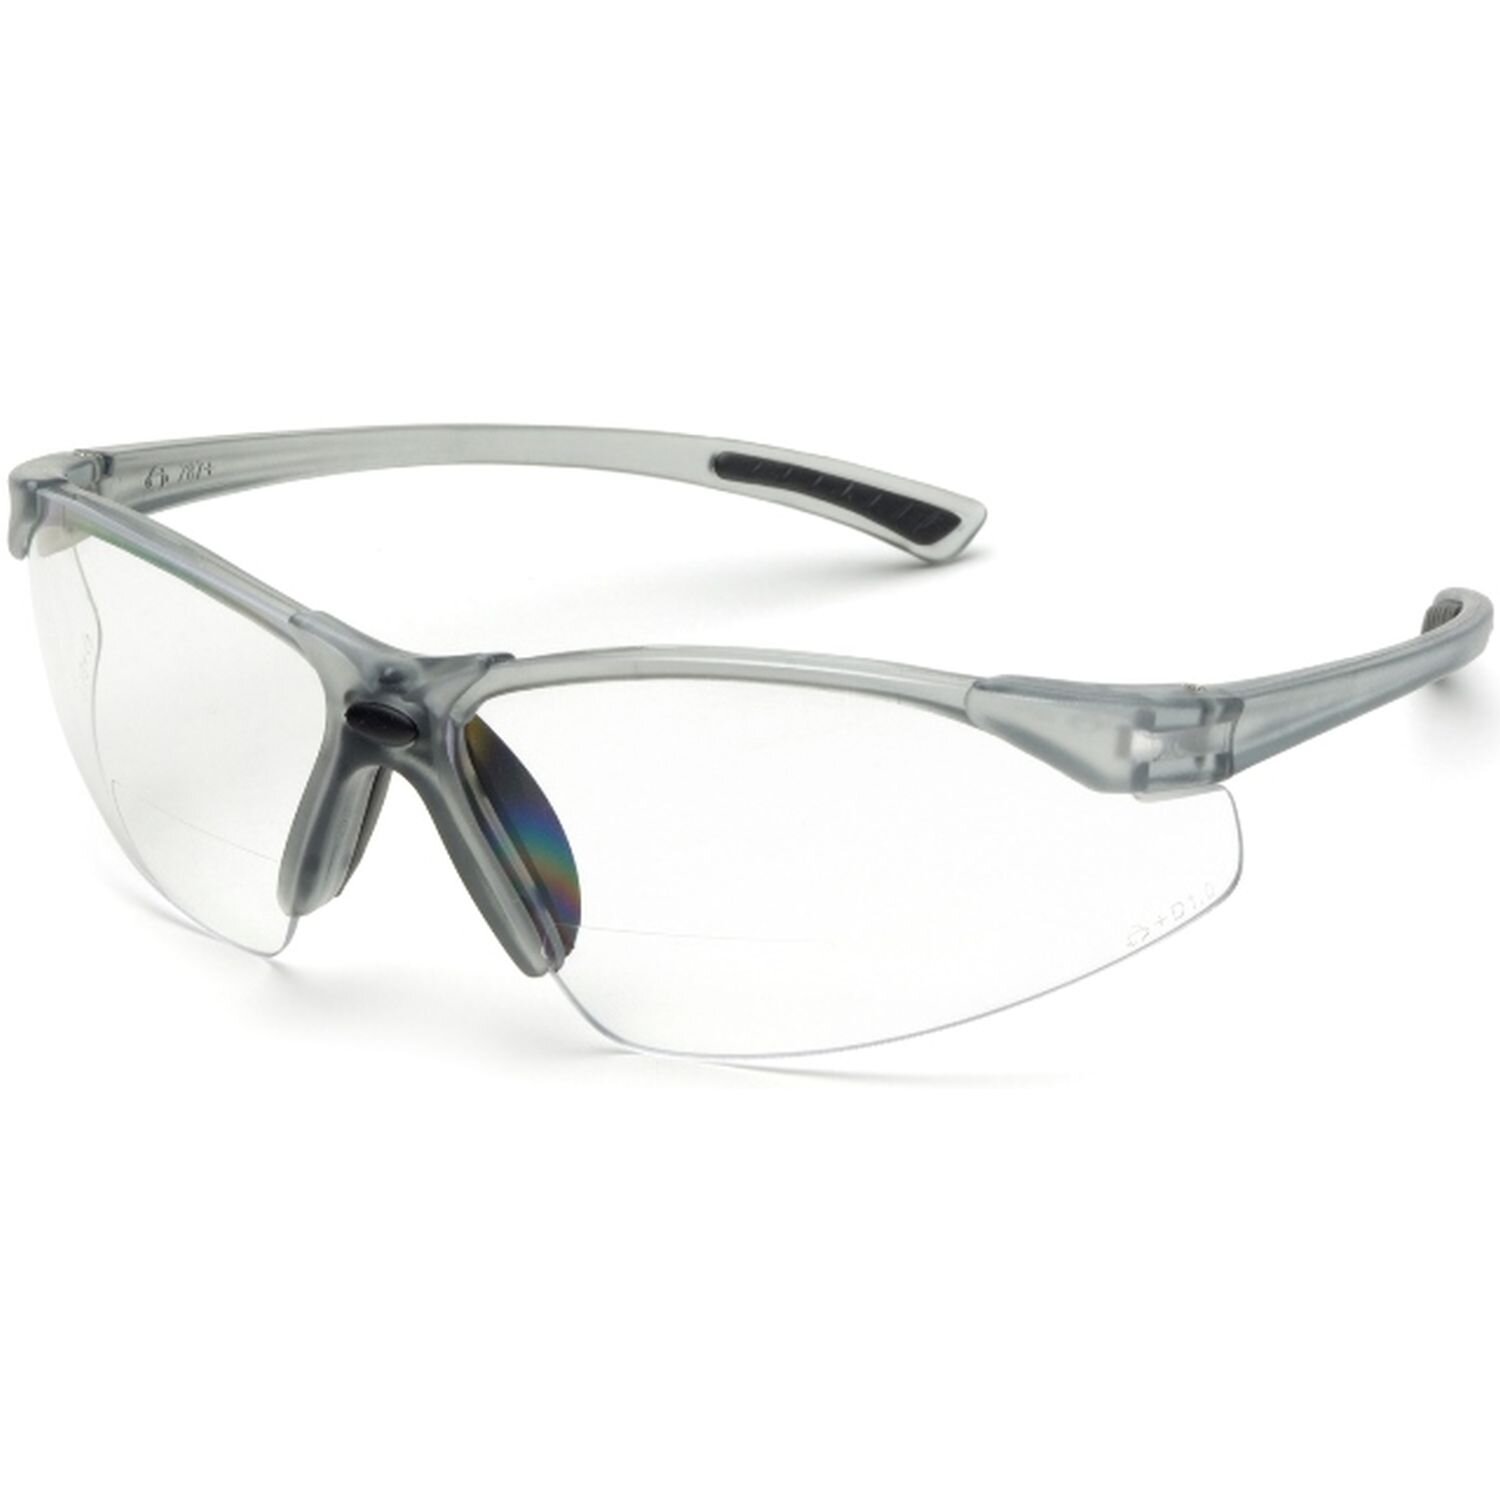 Bifocal Safety Glasses 3.0 Diopter